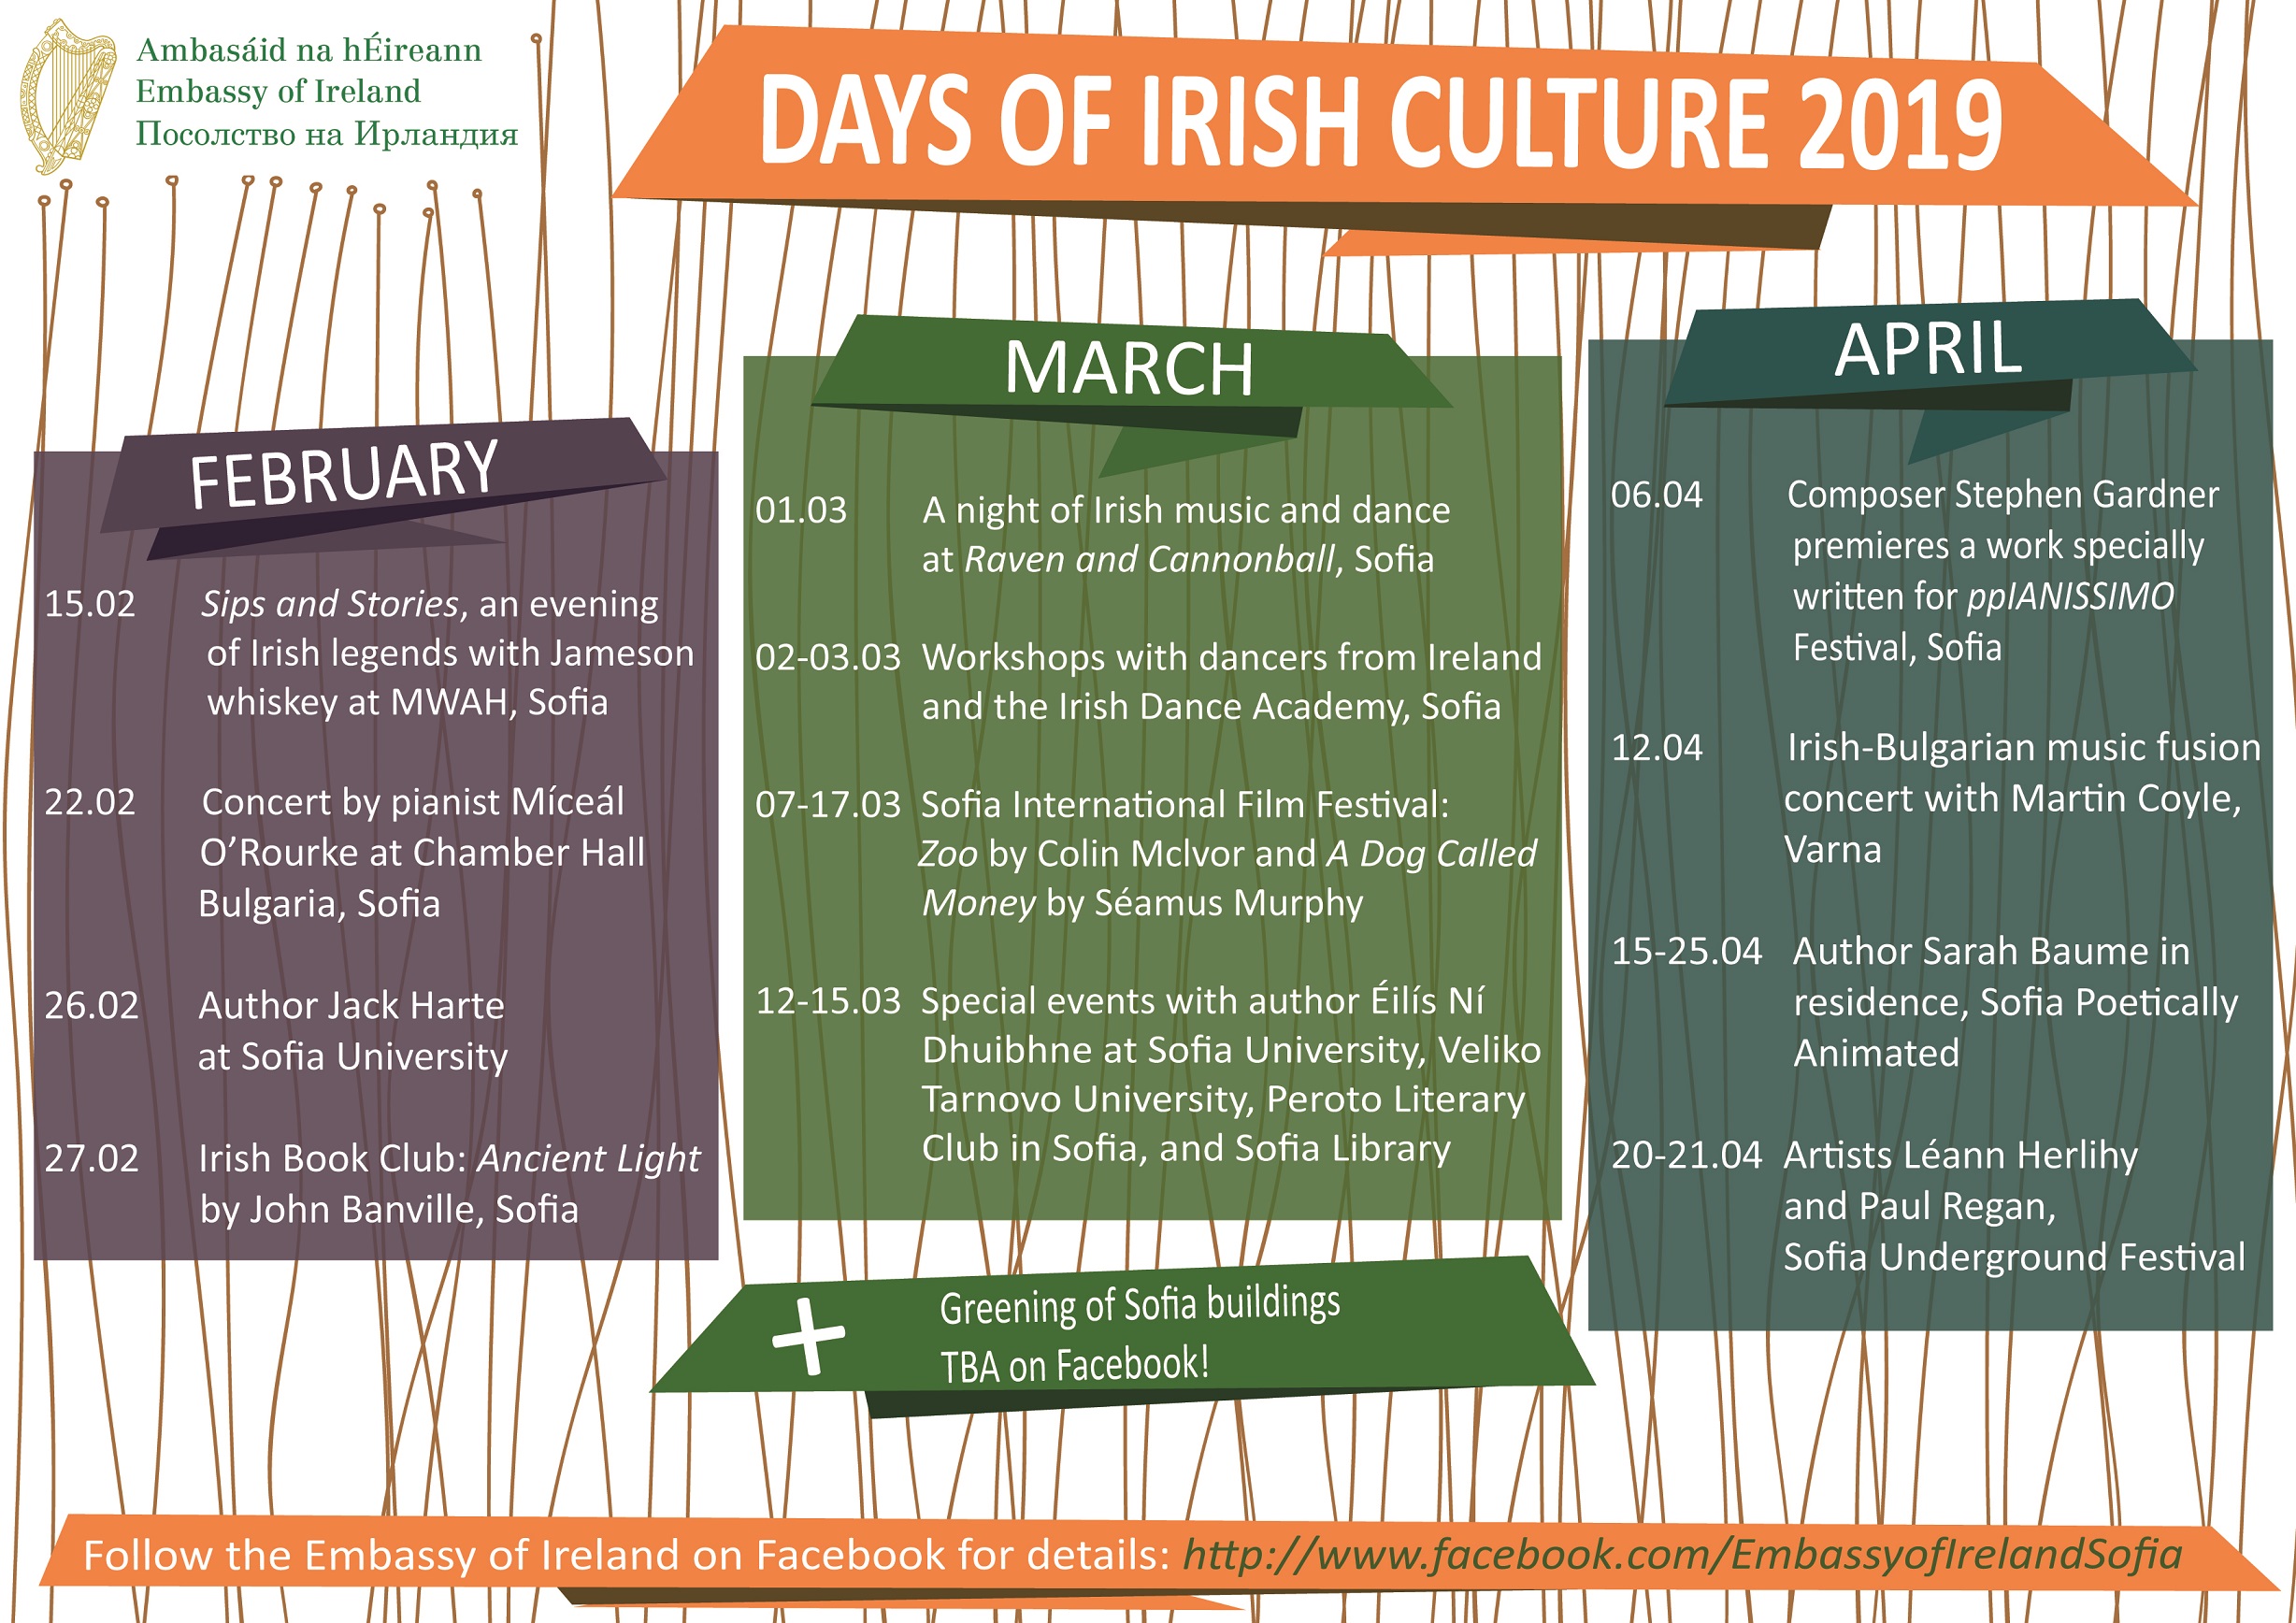 The Embassy of Ireland celebrates St Patrick’s Day with special events 